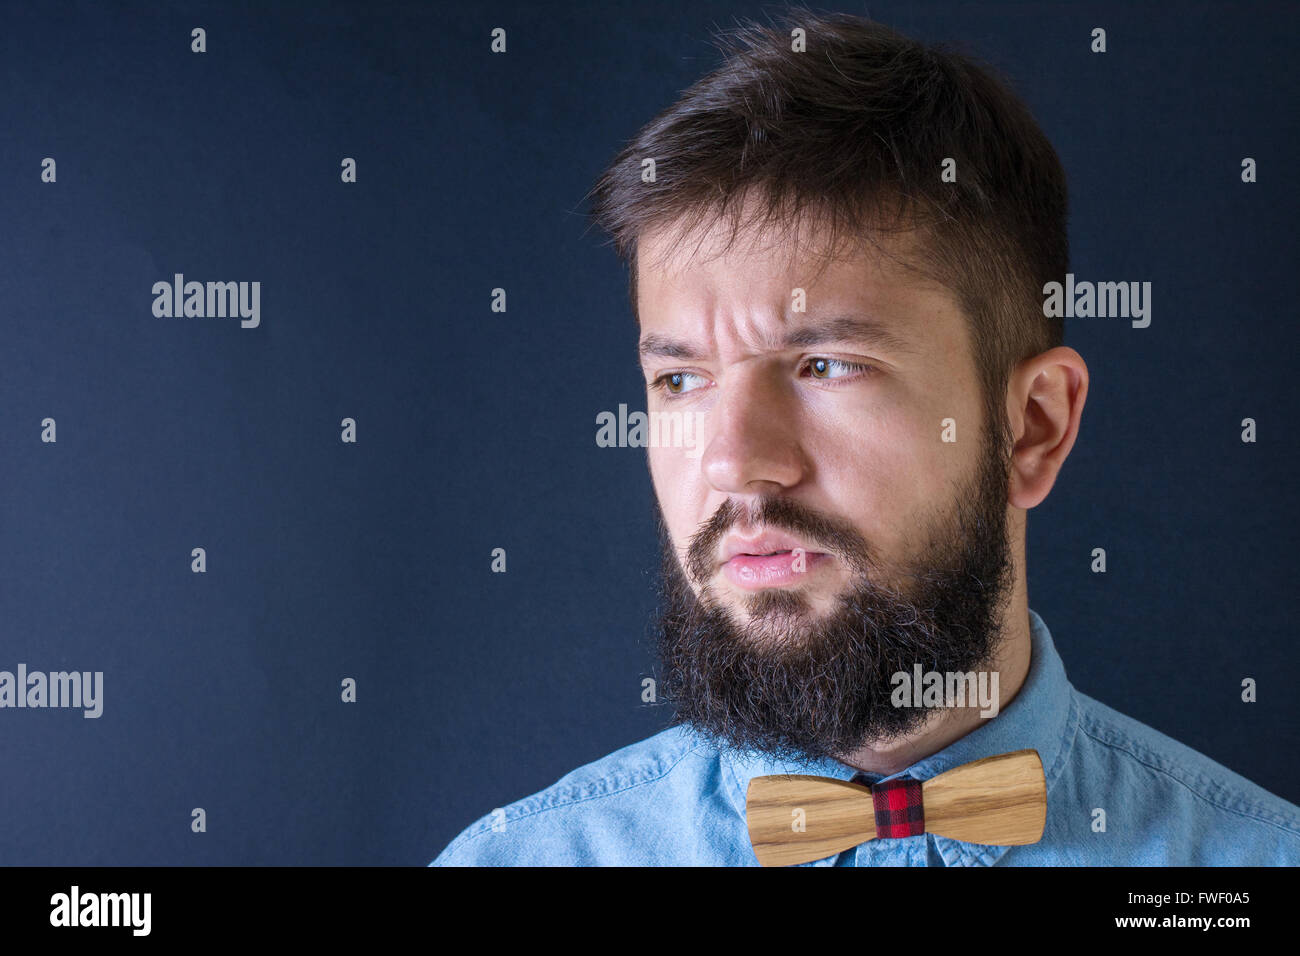 Angry bearded man in a blue shirt Stock Photo